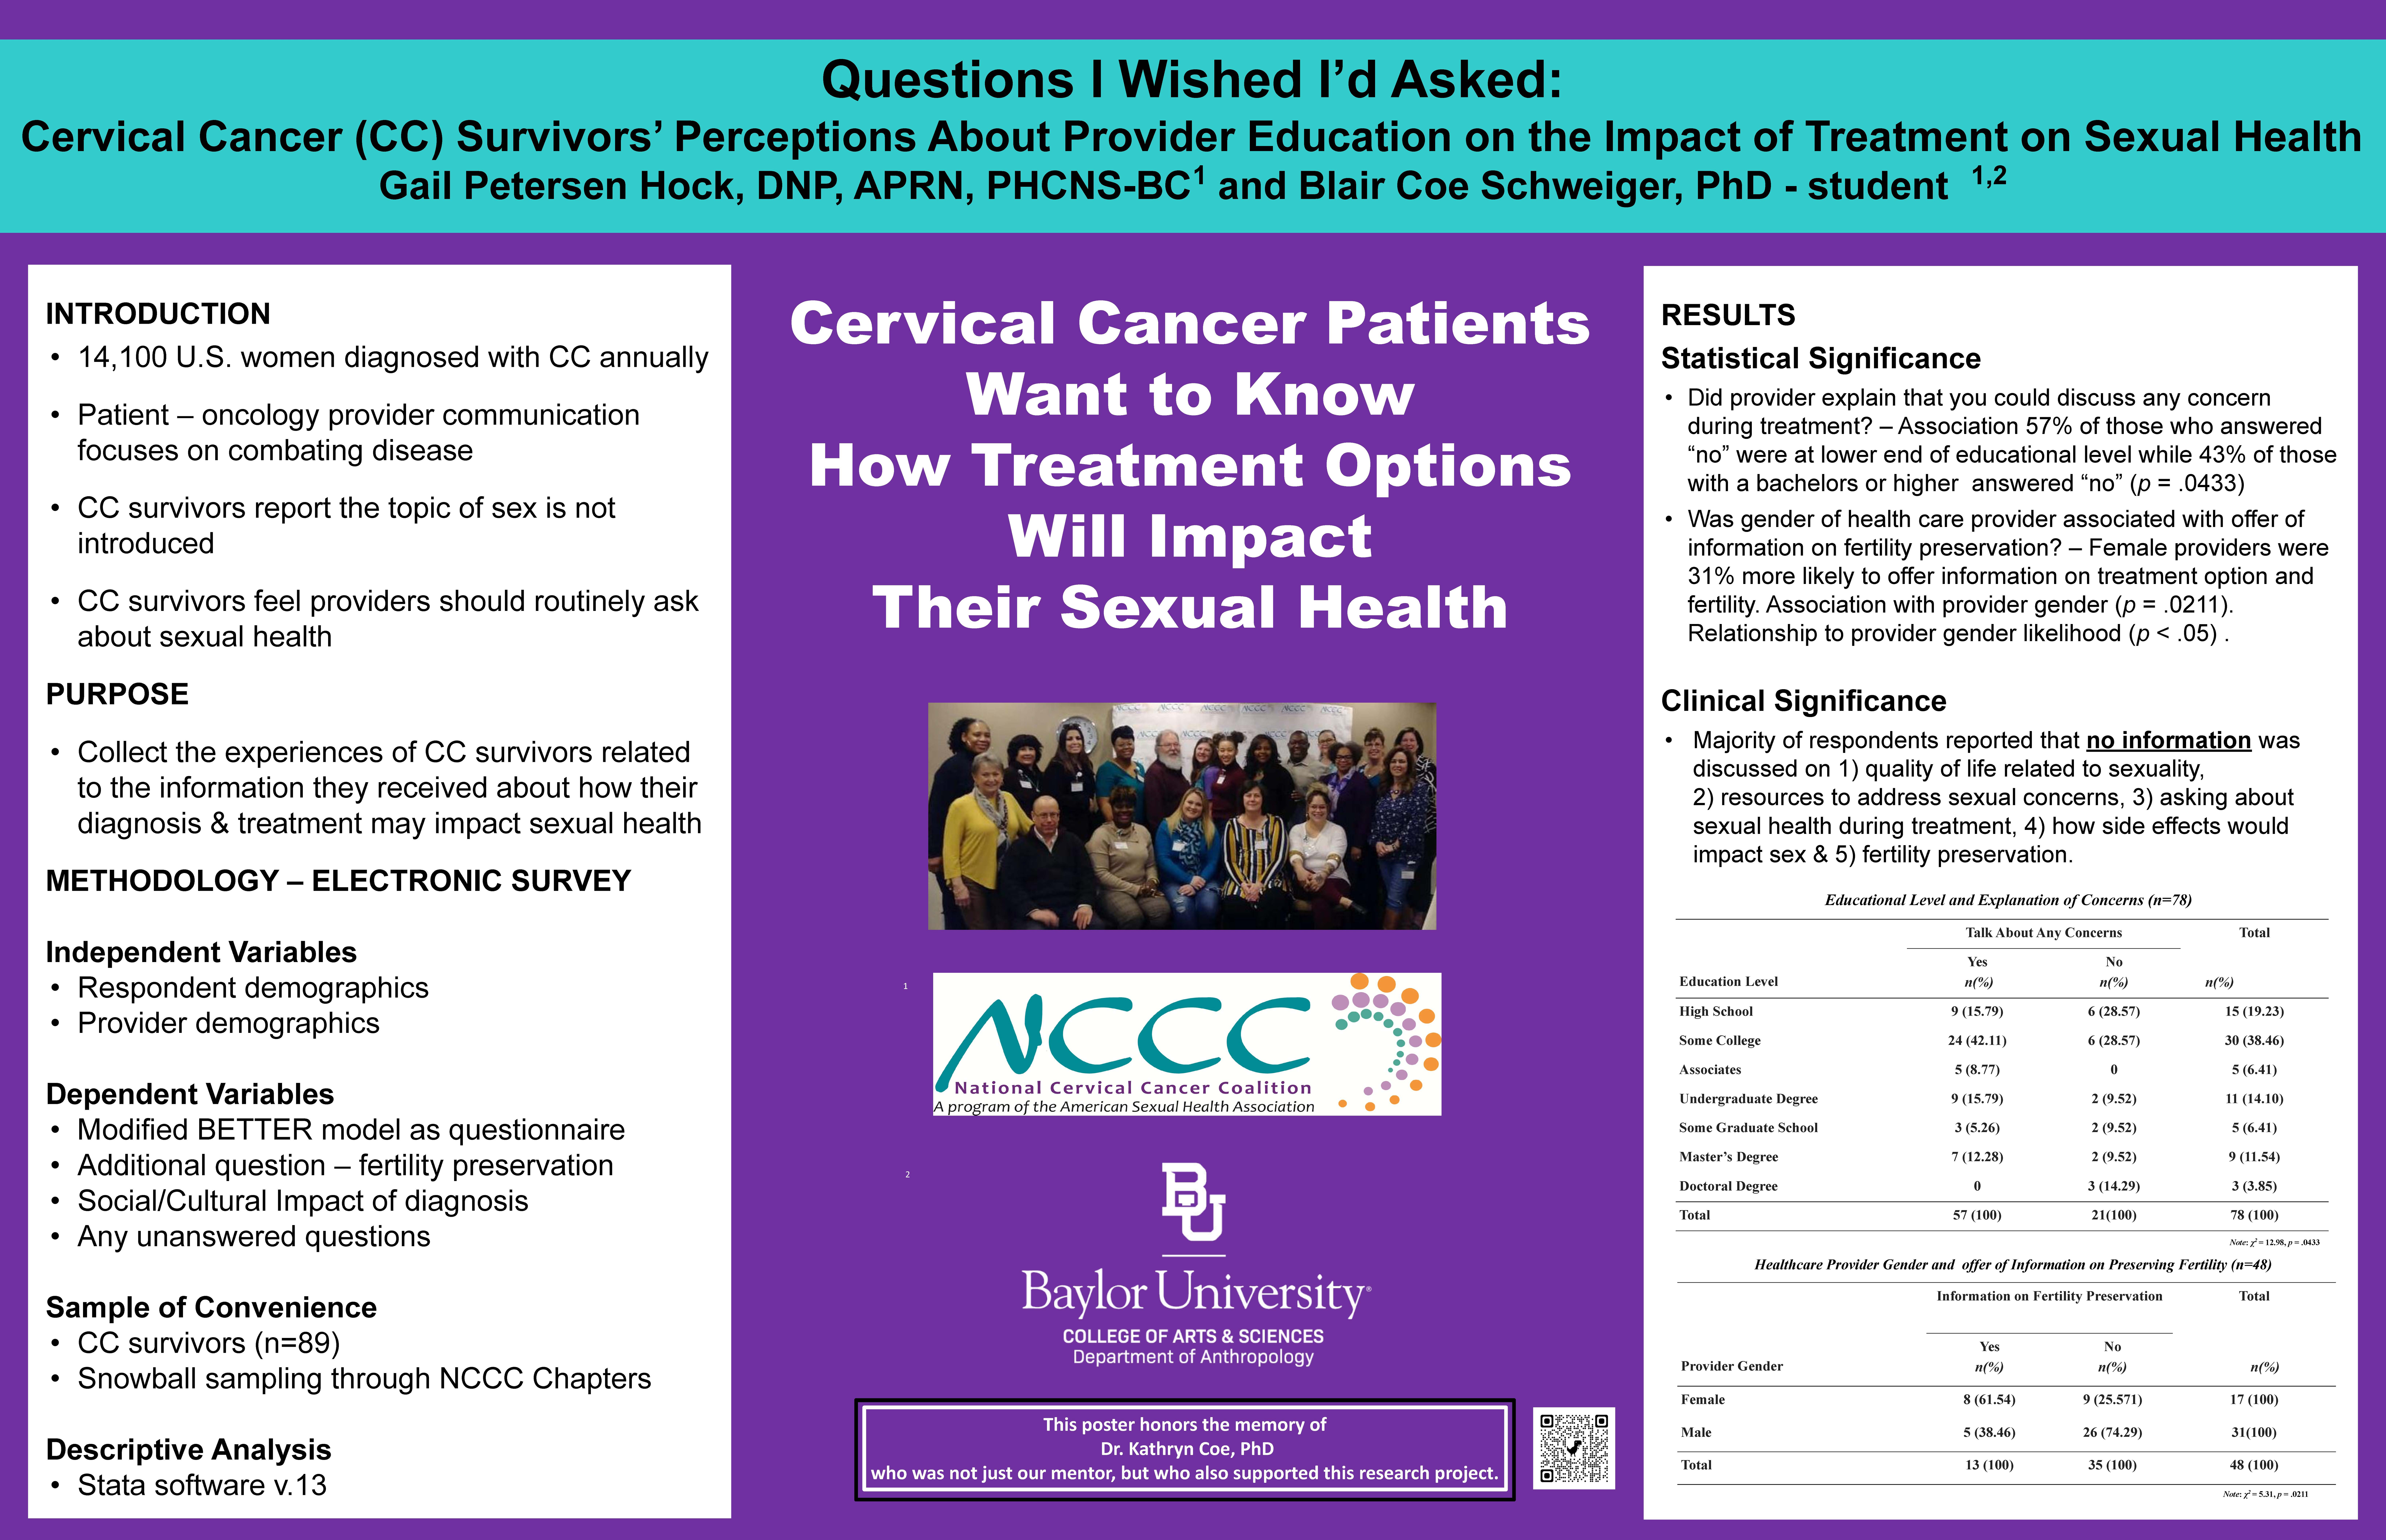 poster - Questions I Wished I'd Asked: Cervical Cancer (CC) Survivors' Perceptions About Provider Education on the Impact of Treatment on Sexual Health